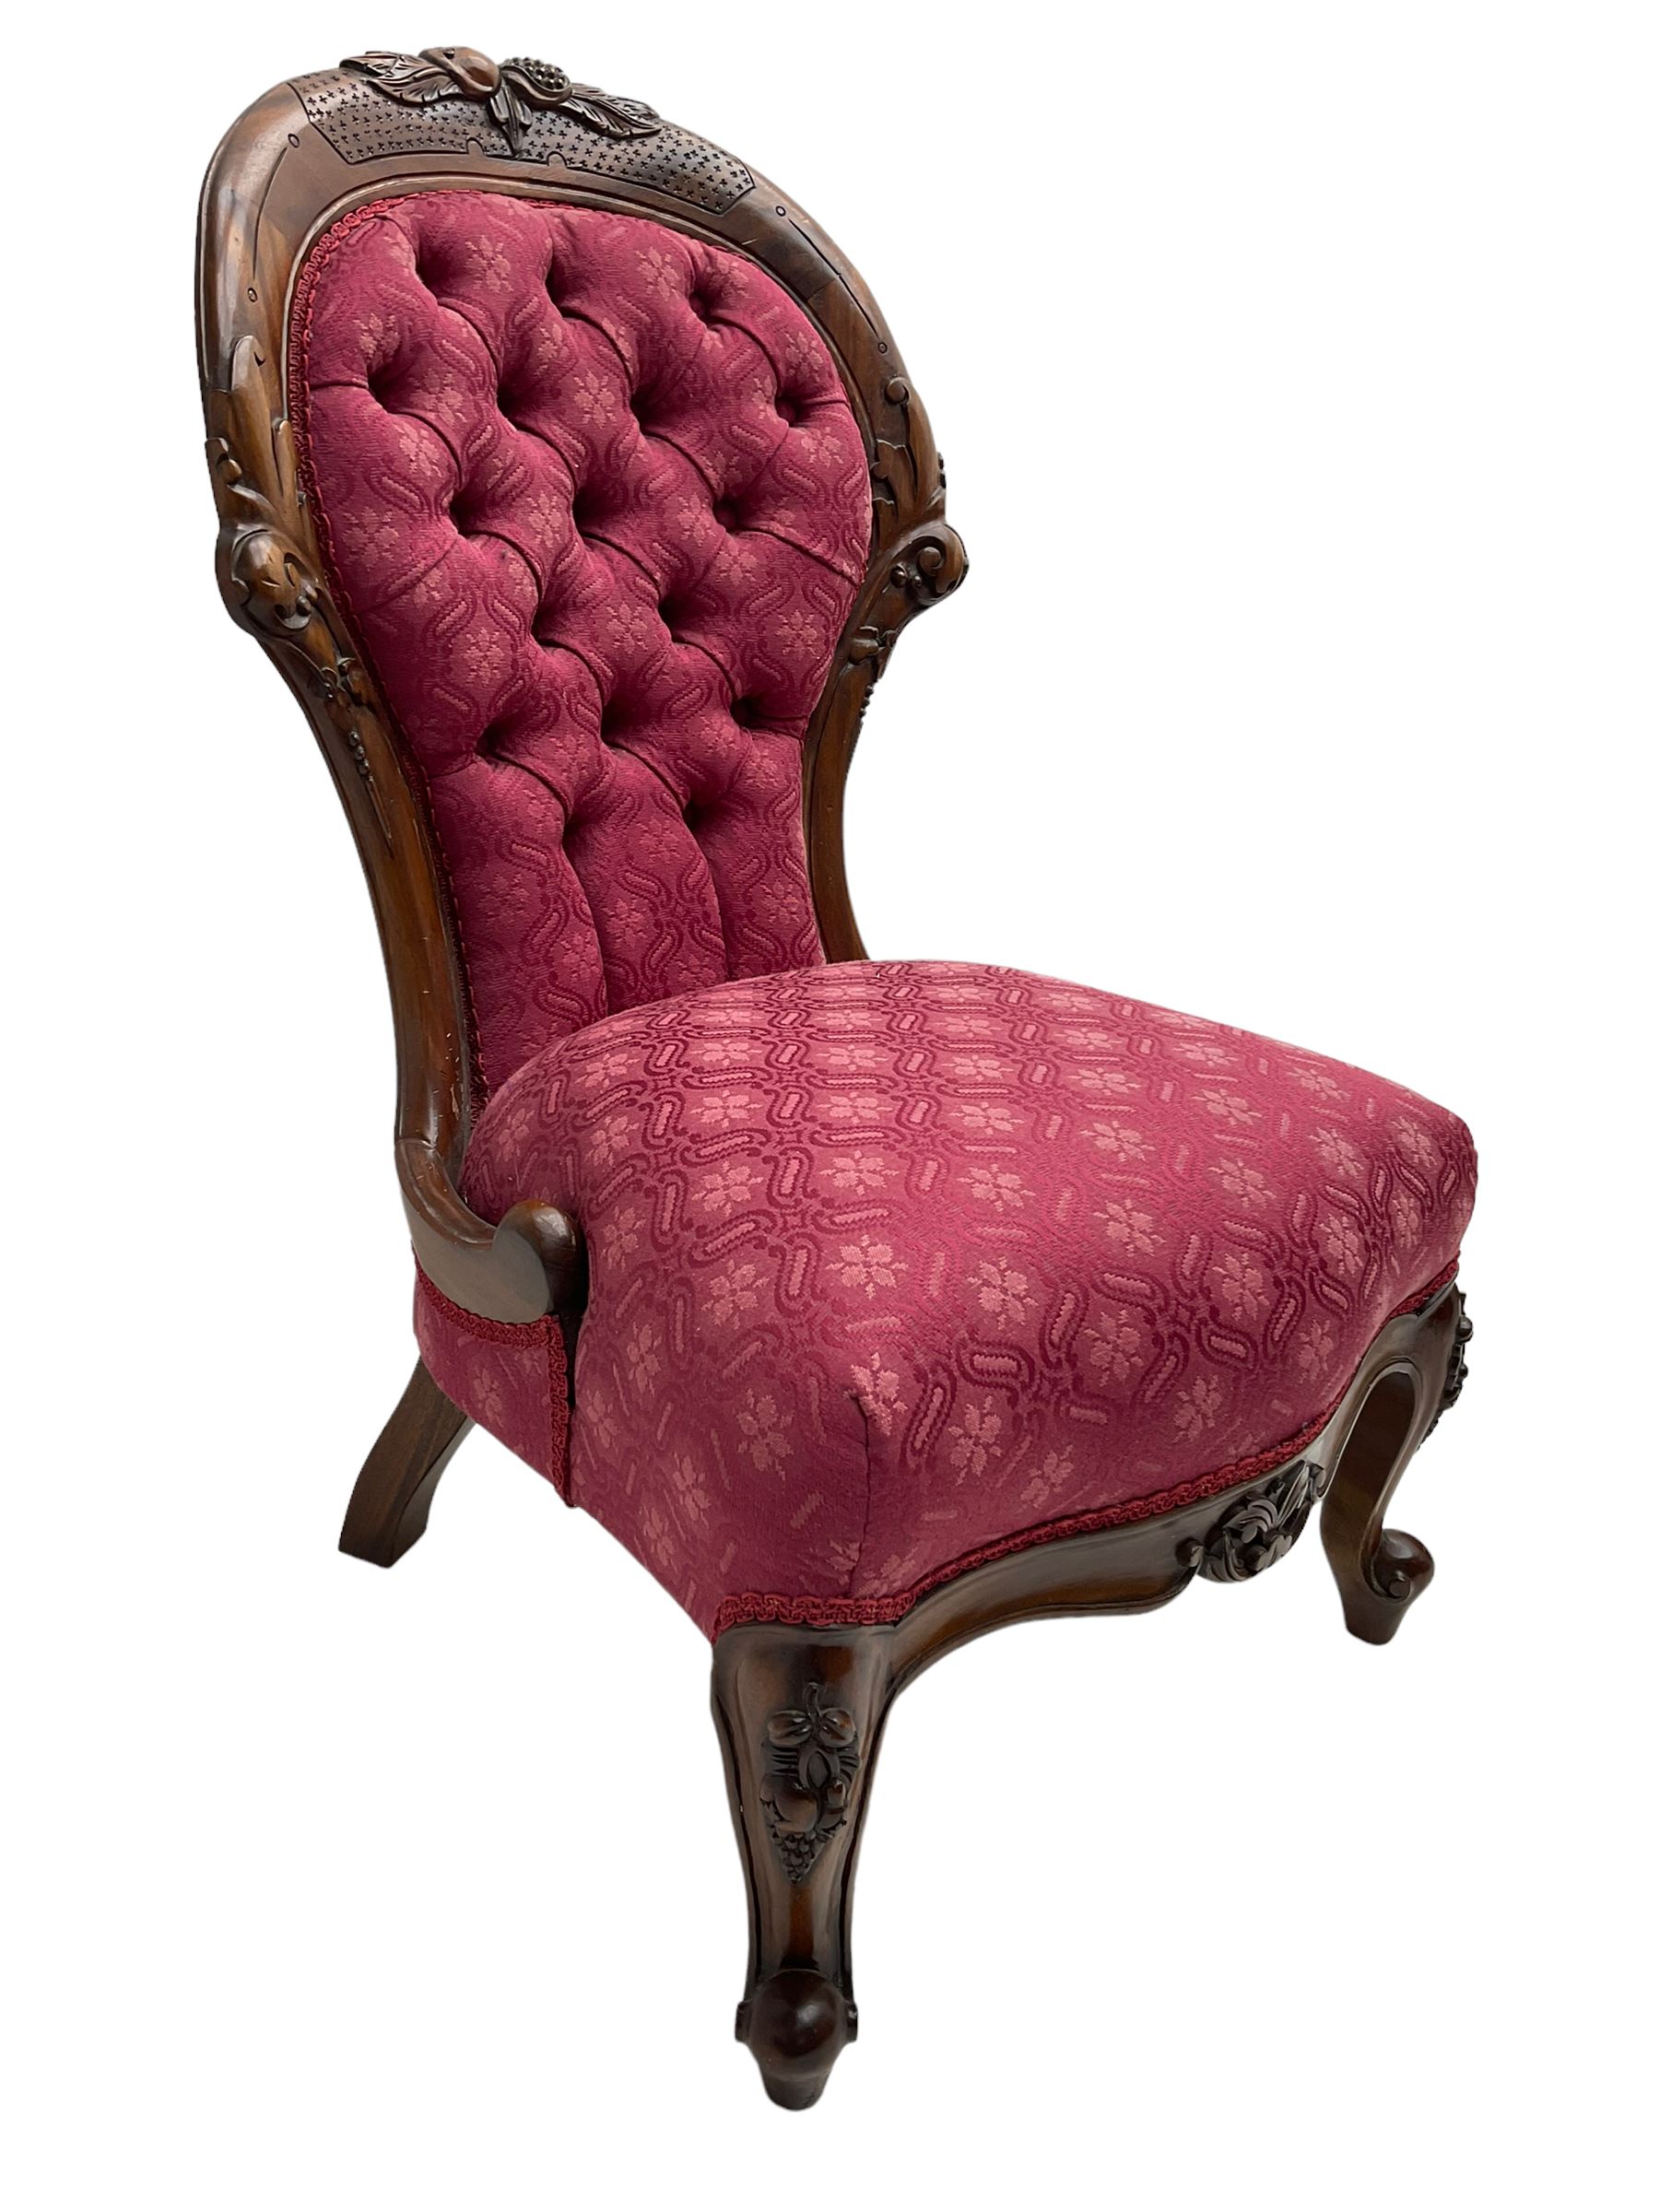 Victorian style mahogany framed nursing chair - Image 6 of 6